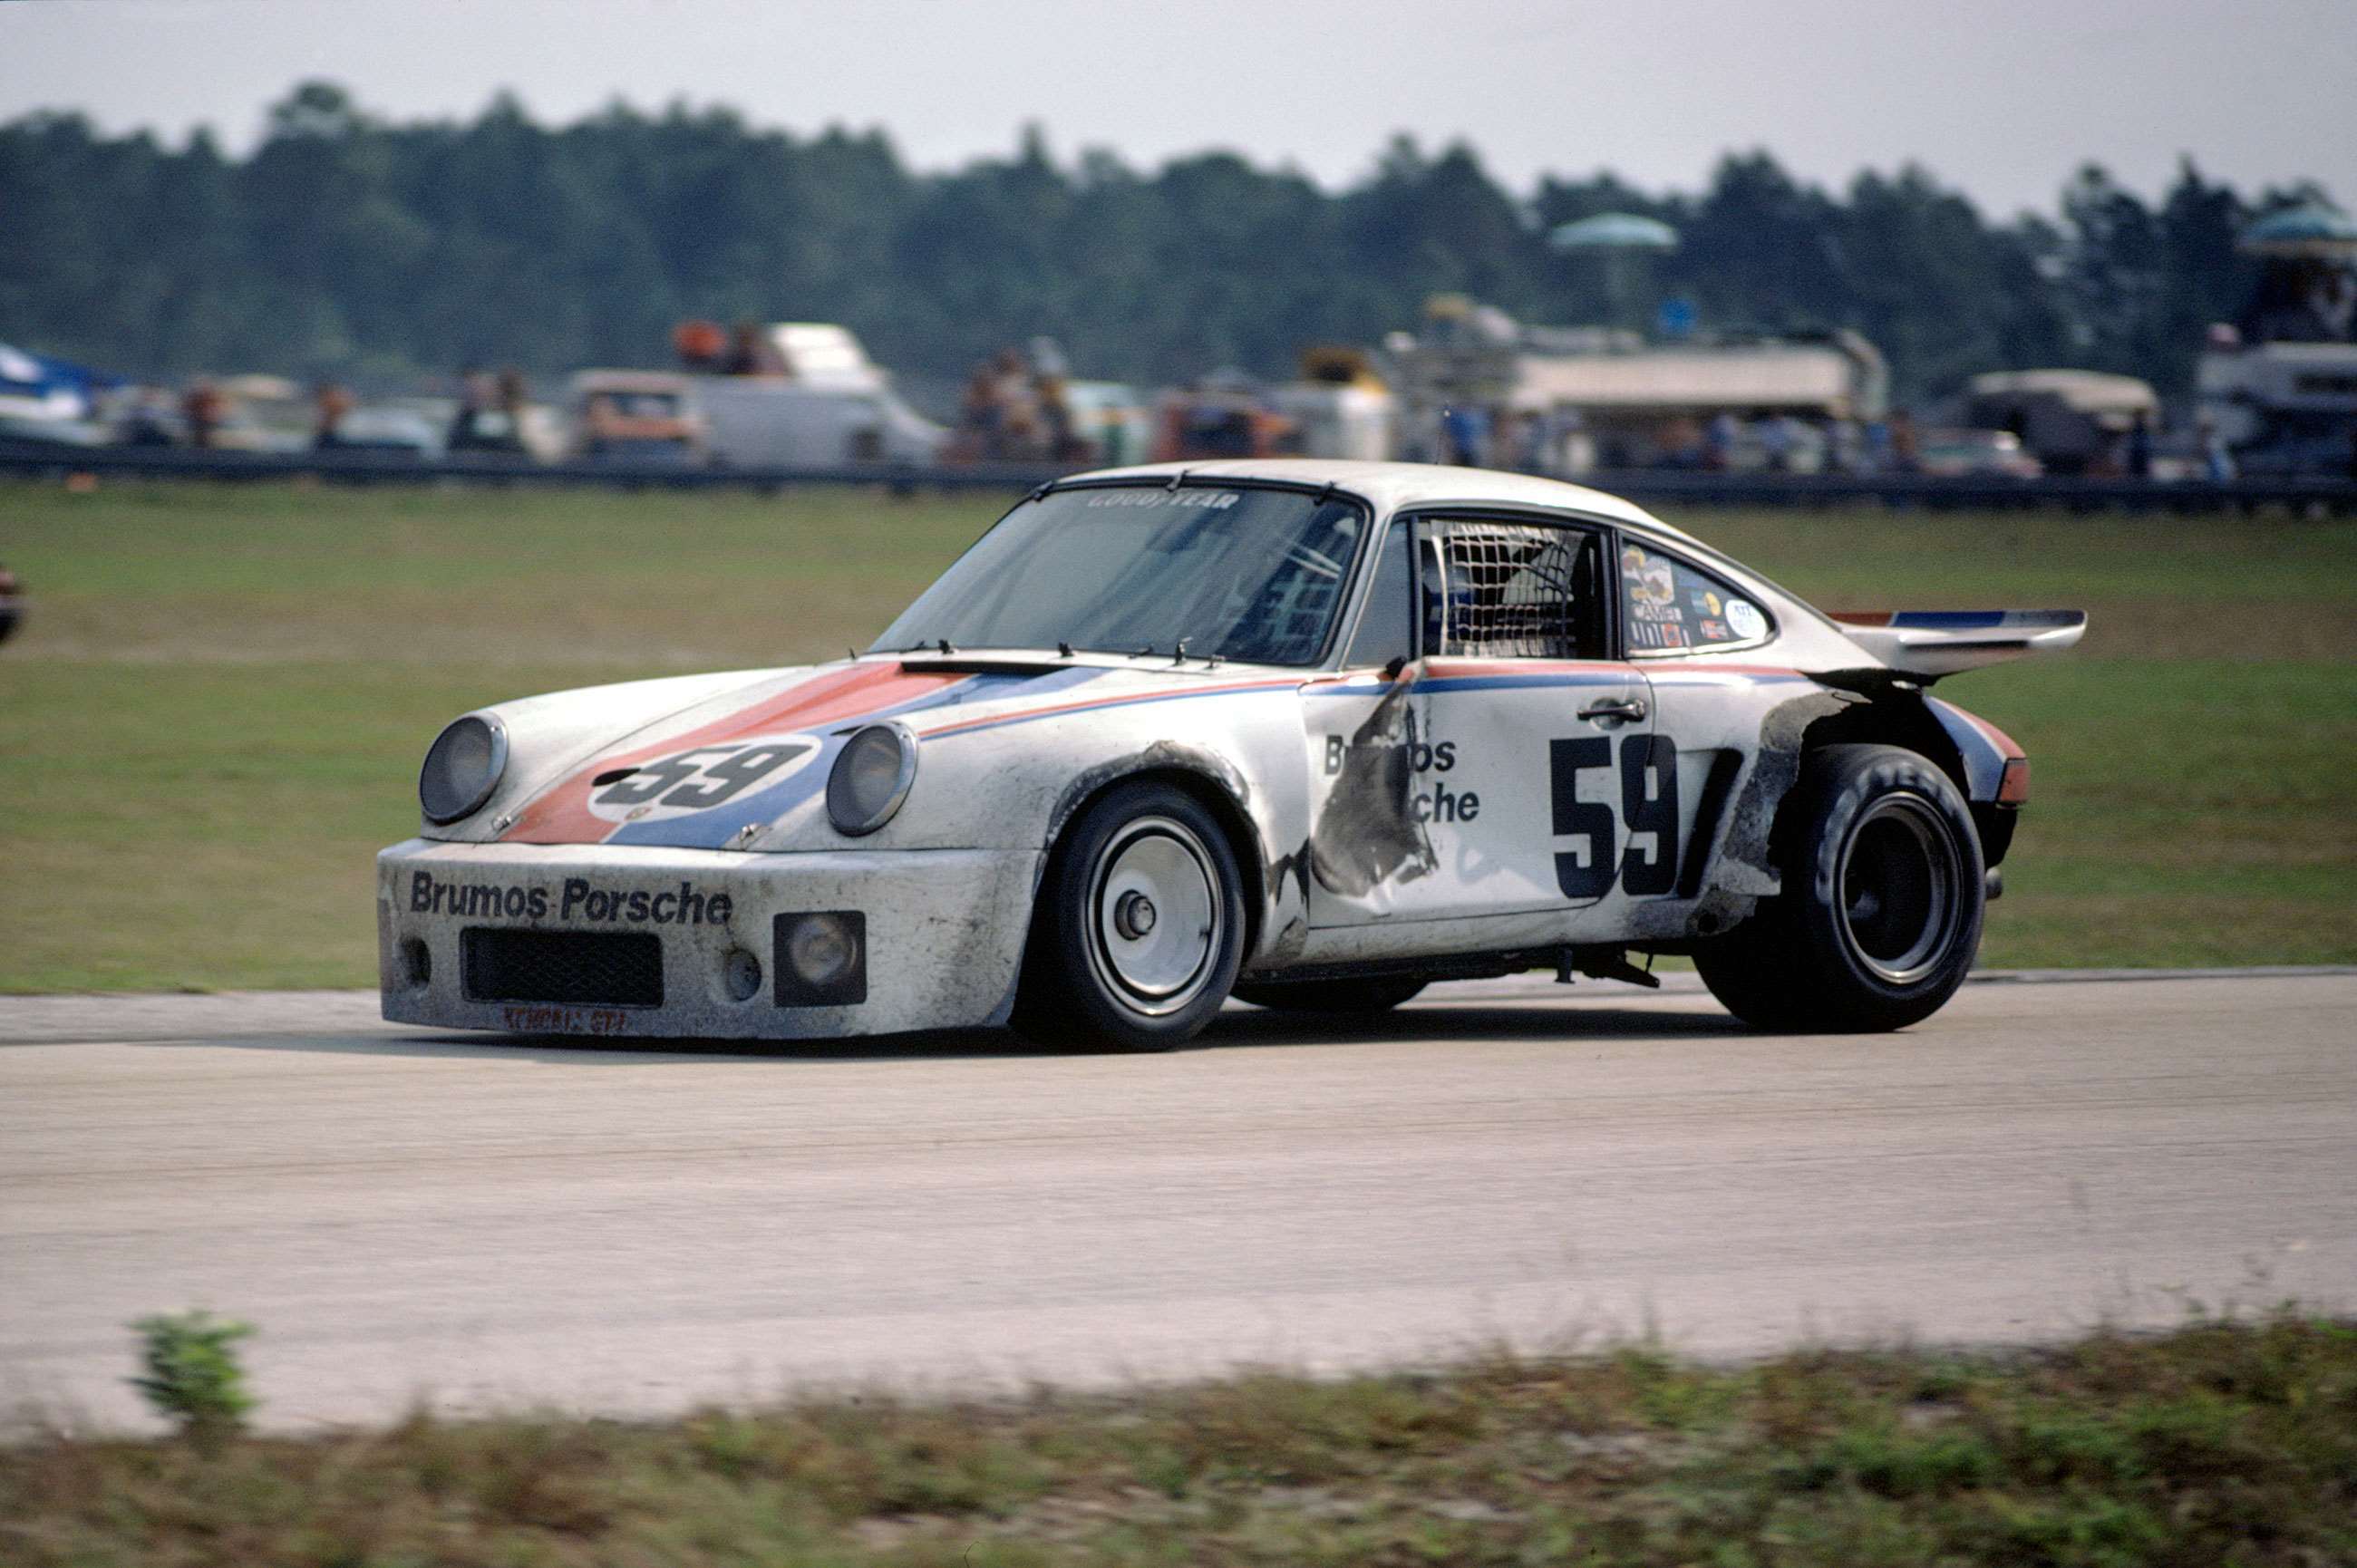 The no. 59 Porsche 911 Carrera RSR of Peter Gregg and Hurley Haywood that went on to win the 1975 24 Hours of Daytona.